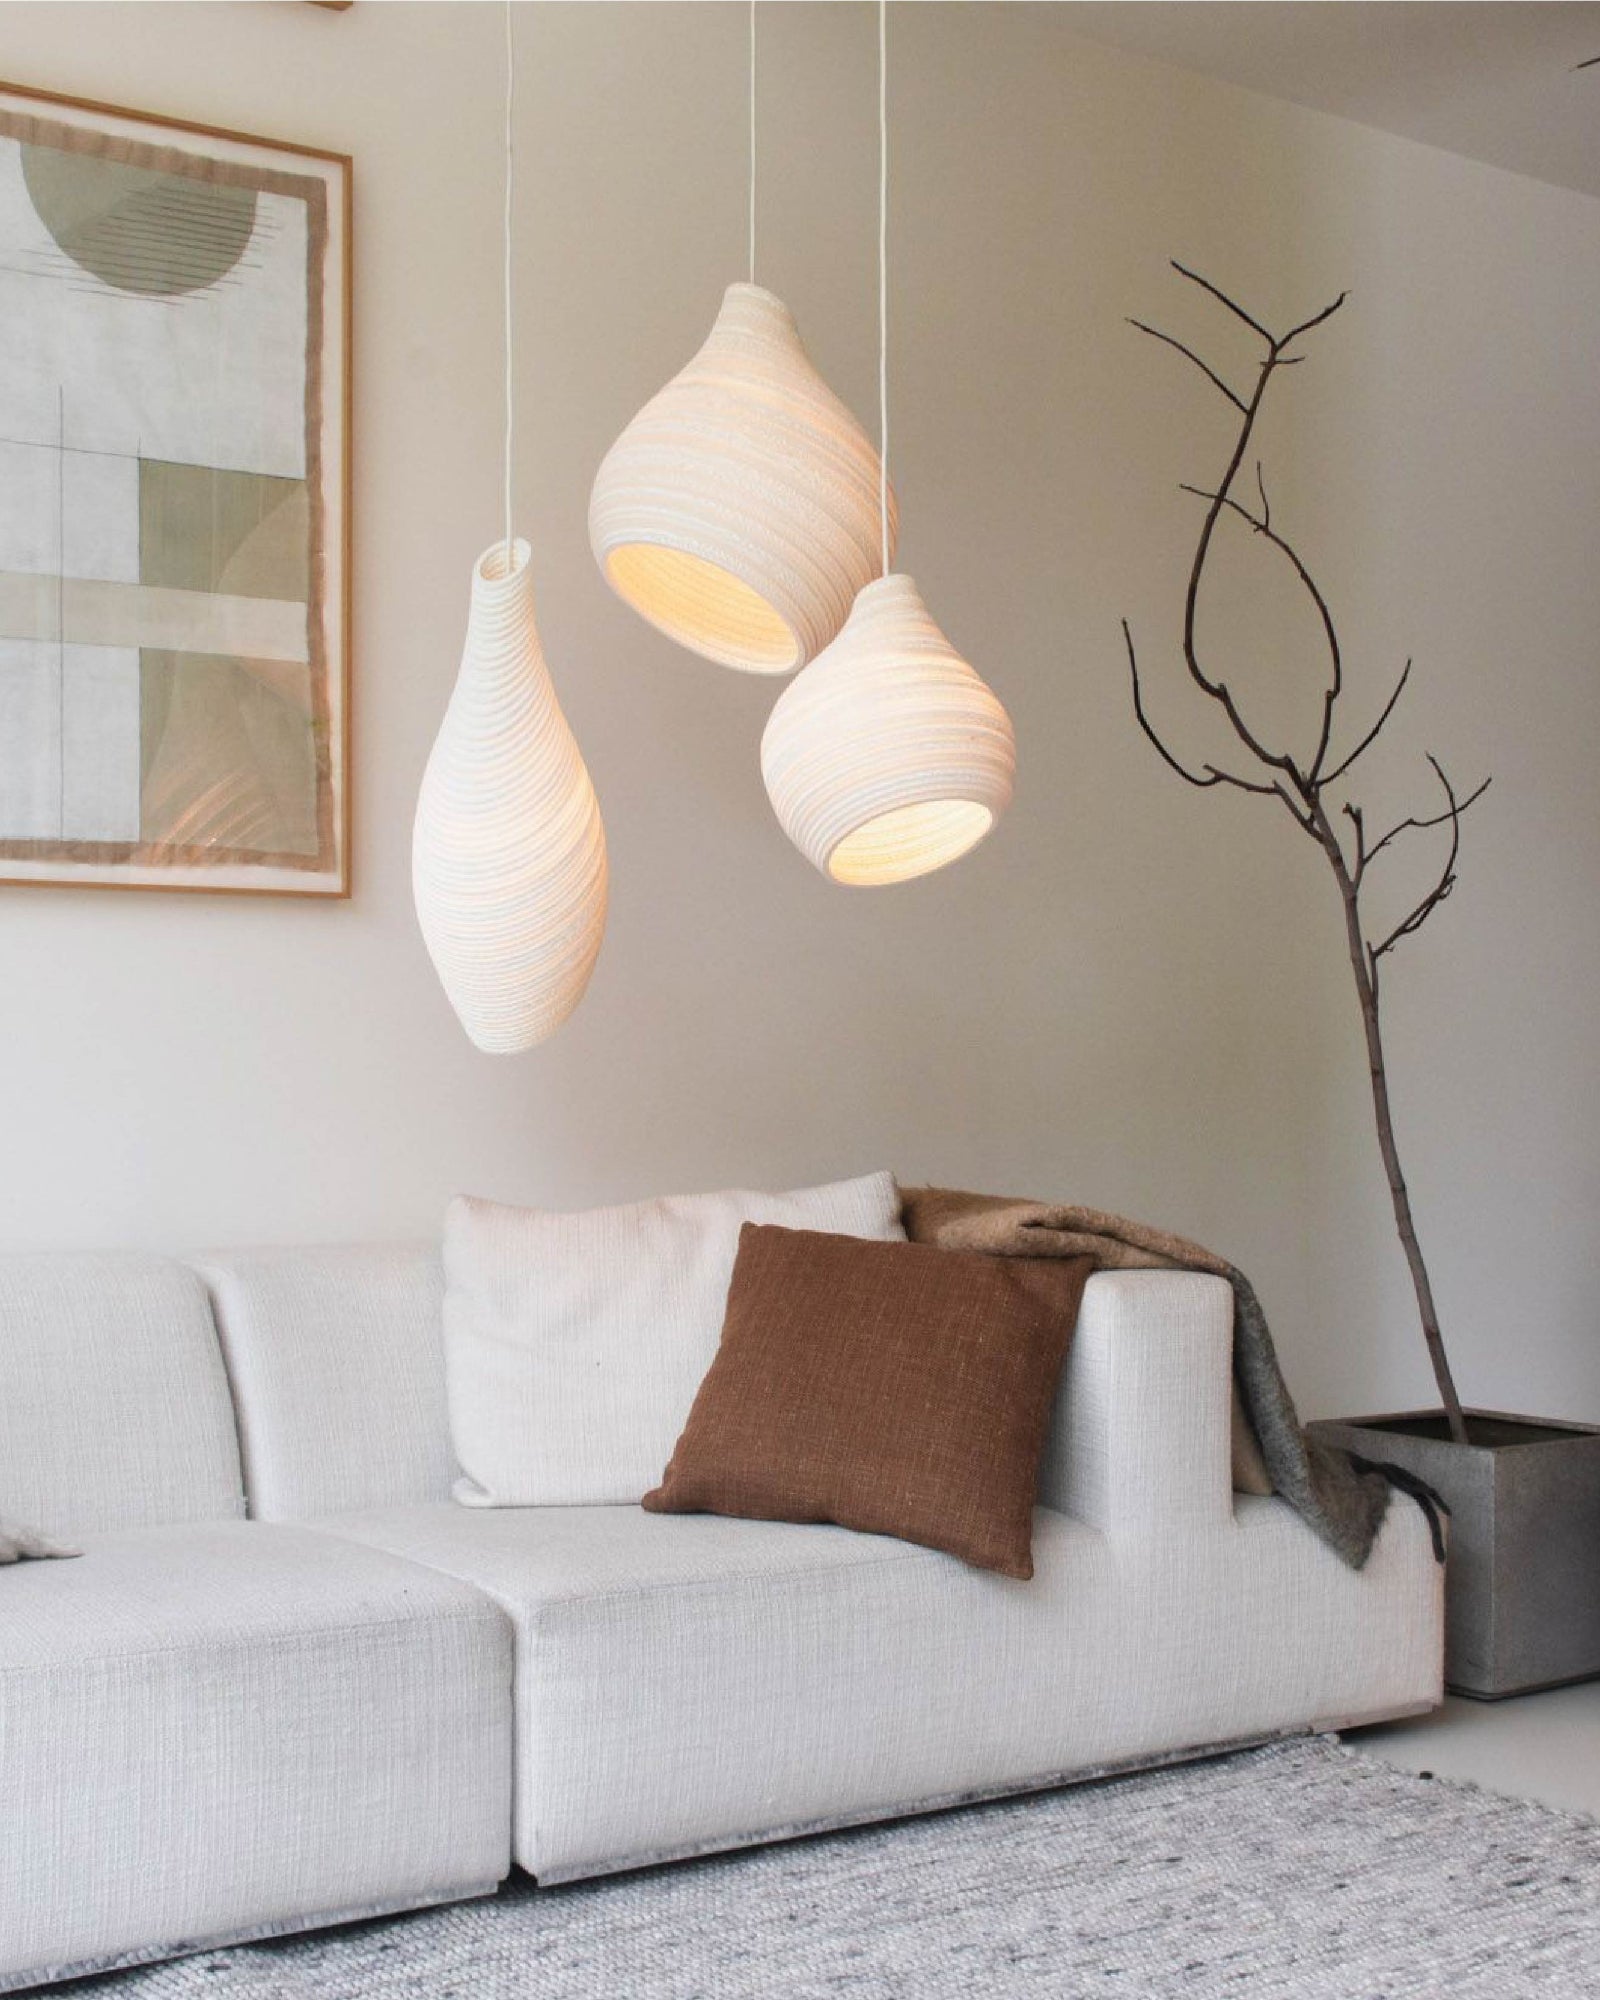 Nest Pendant Light by Gray Pants displayed within a living room | Nook Collections 